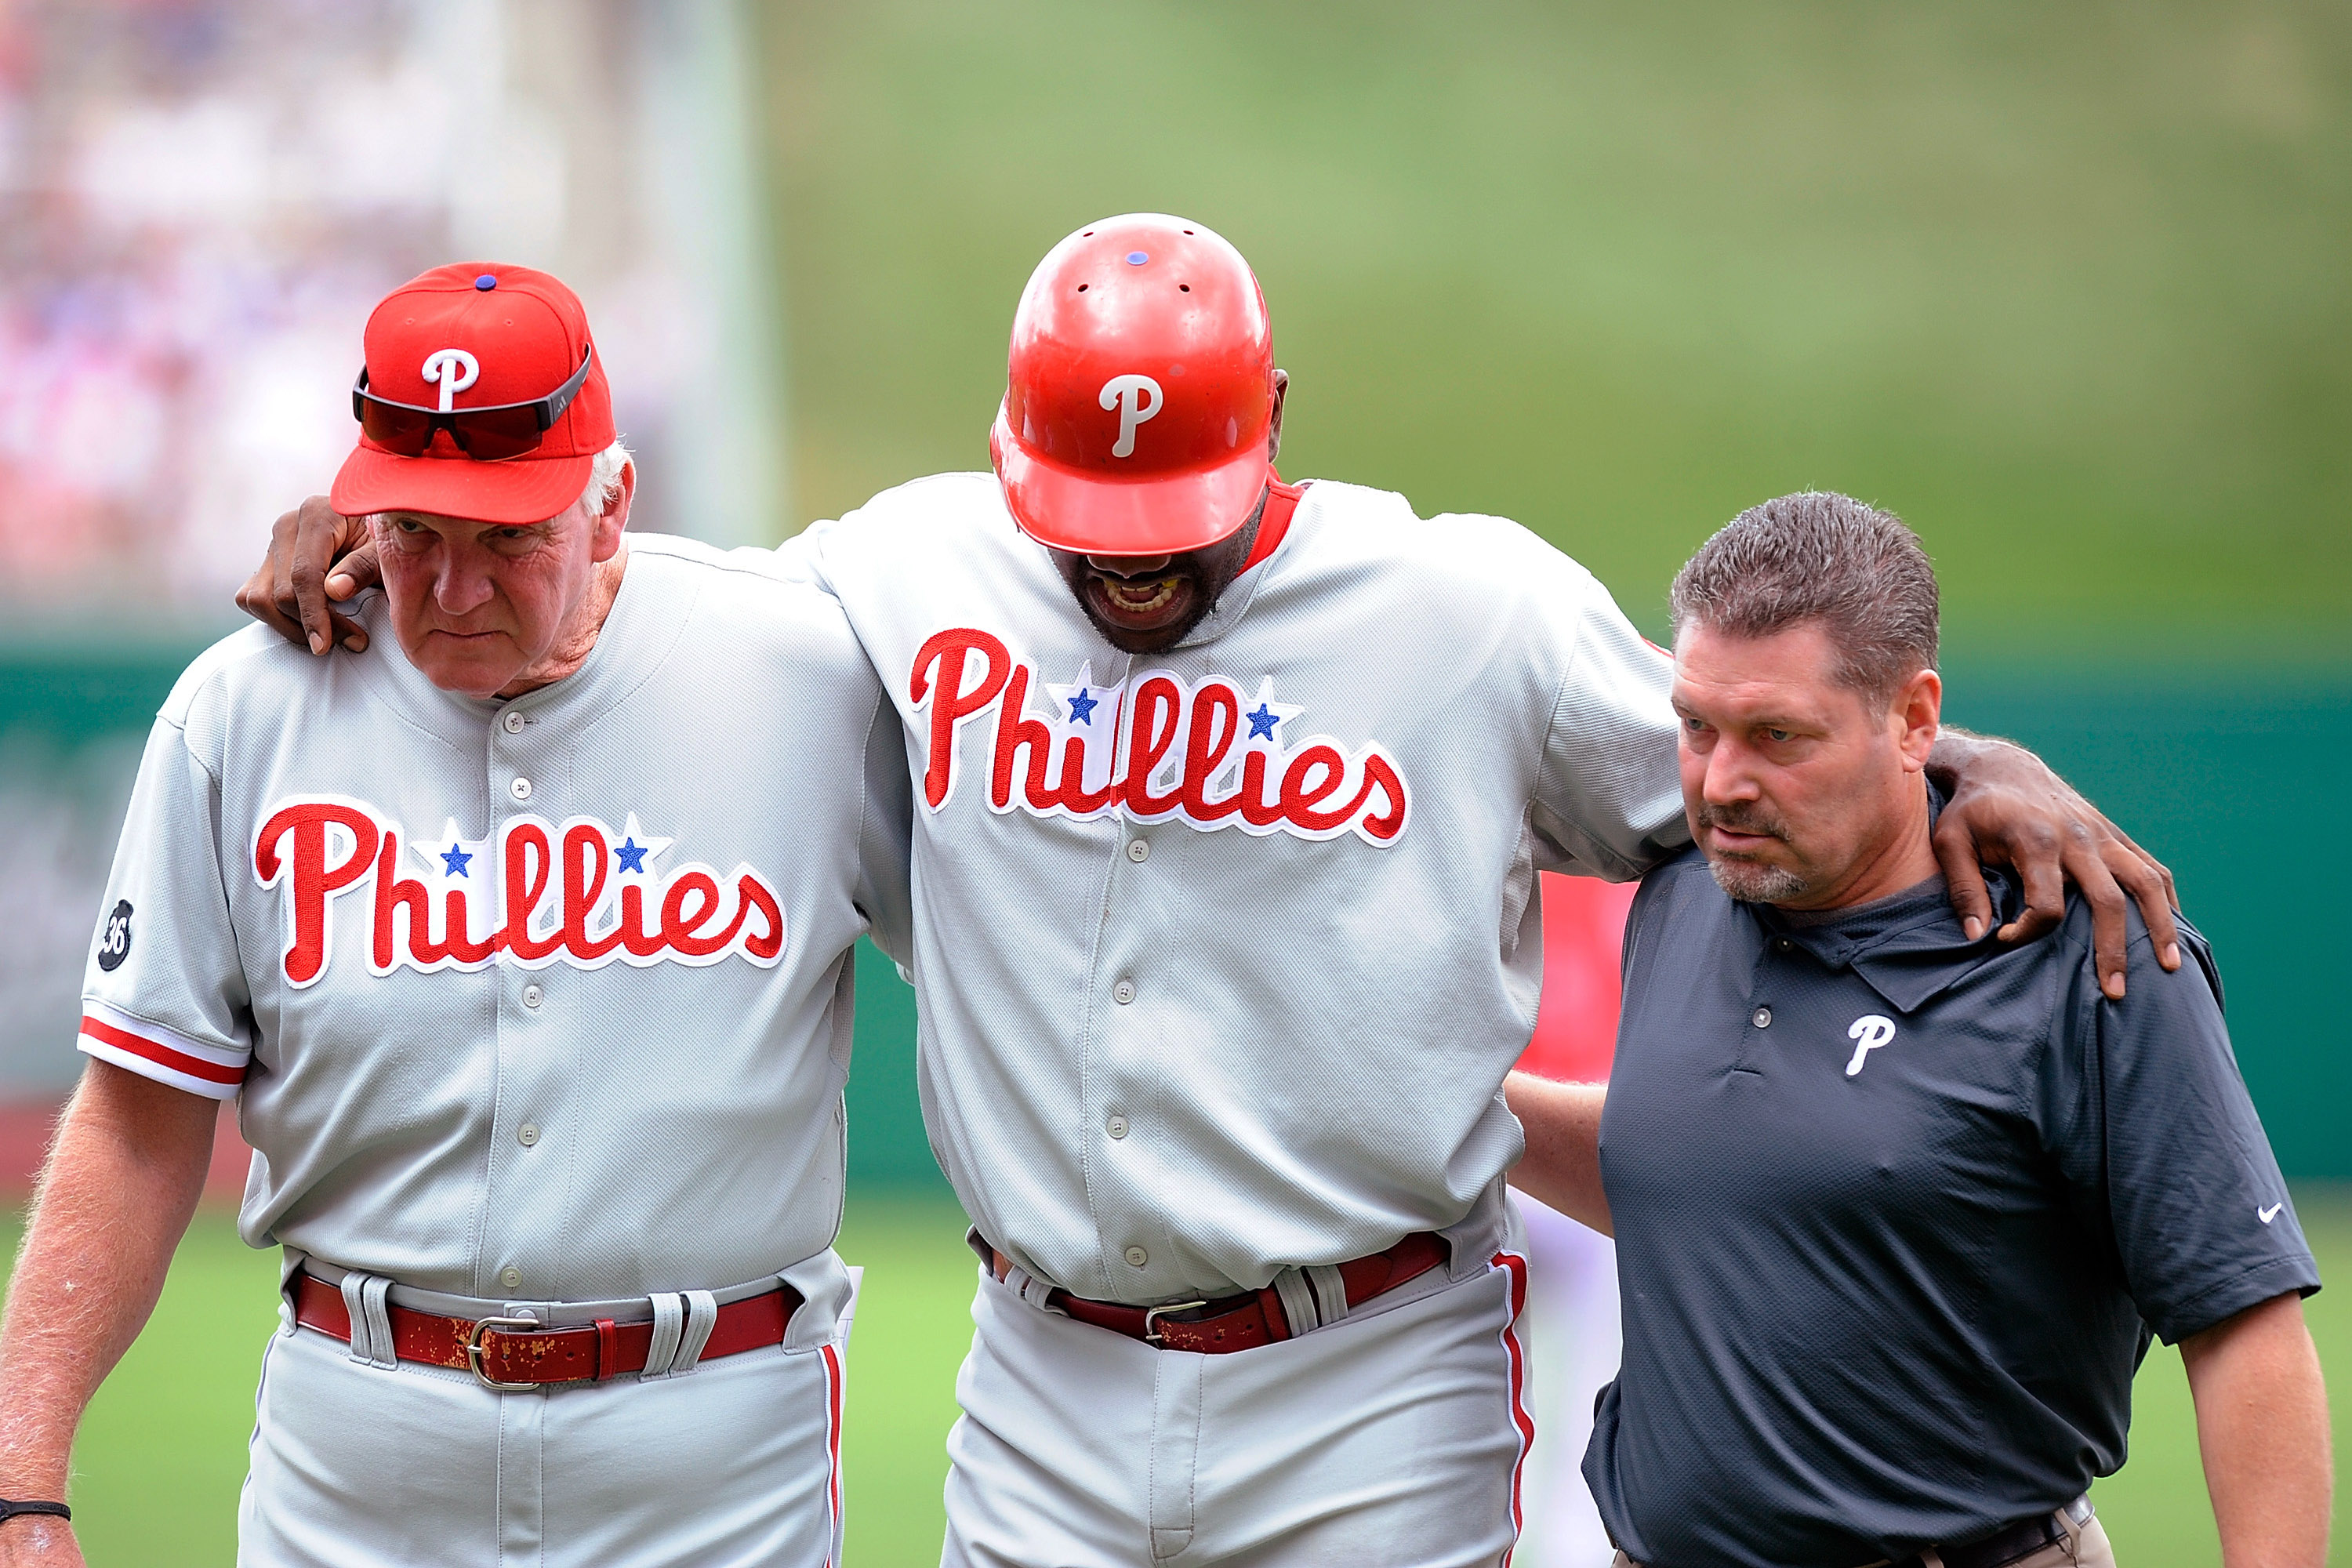 WASHINGTON - AUGUST 01:  Ryan Howard #6 of the Philadelphia Phillies is helped off the field by manager Charlie Manuel and a Philadelphia trainer after injuring his ankle during the first inning against the Washington Nationals at Nationals Park on August